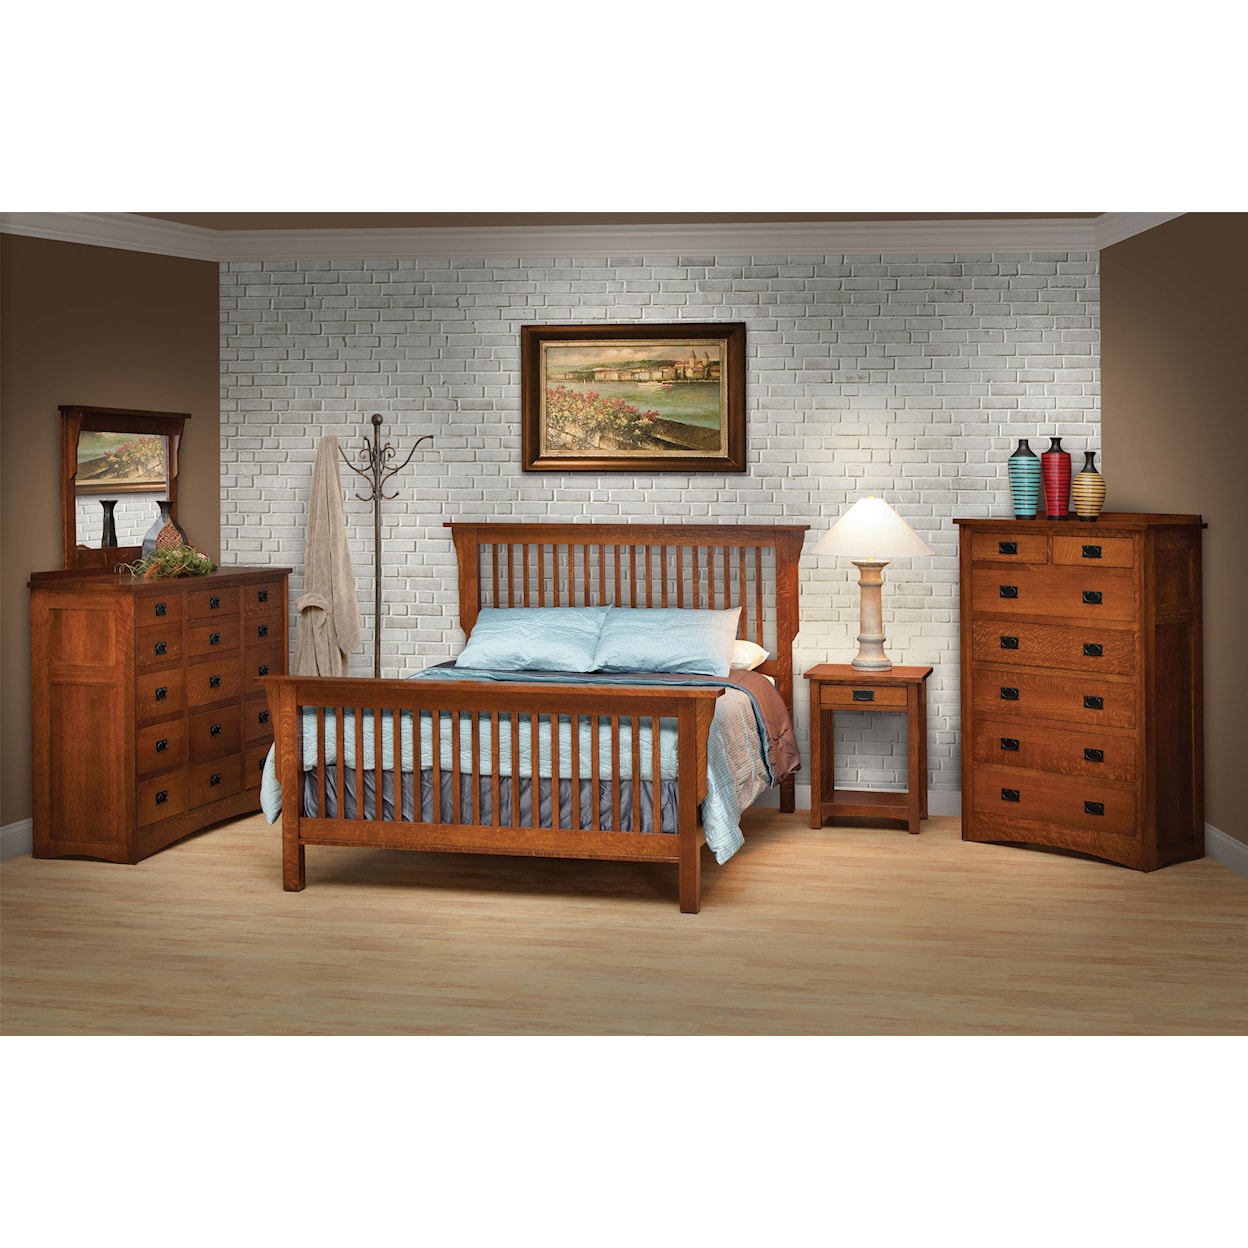 Daniels Amish Mission Cal King Bedroom Group